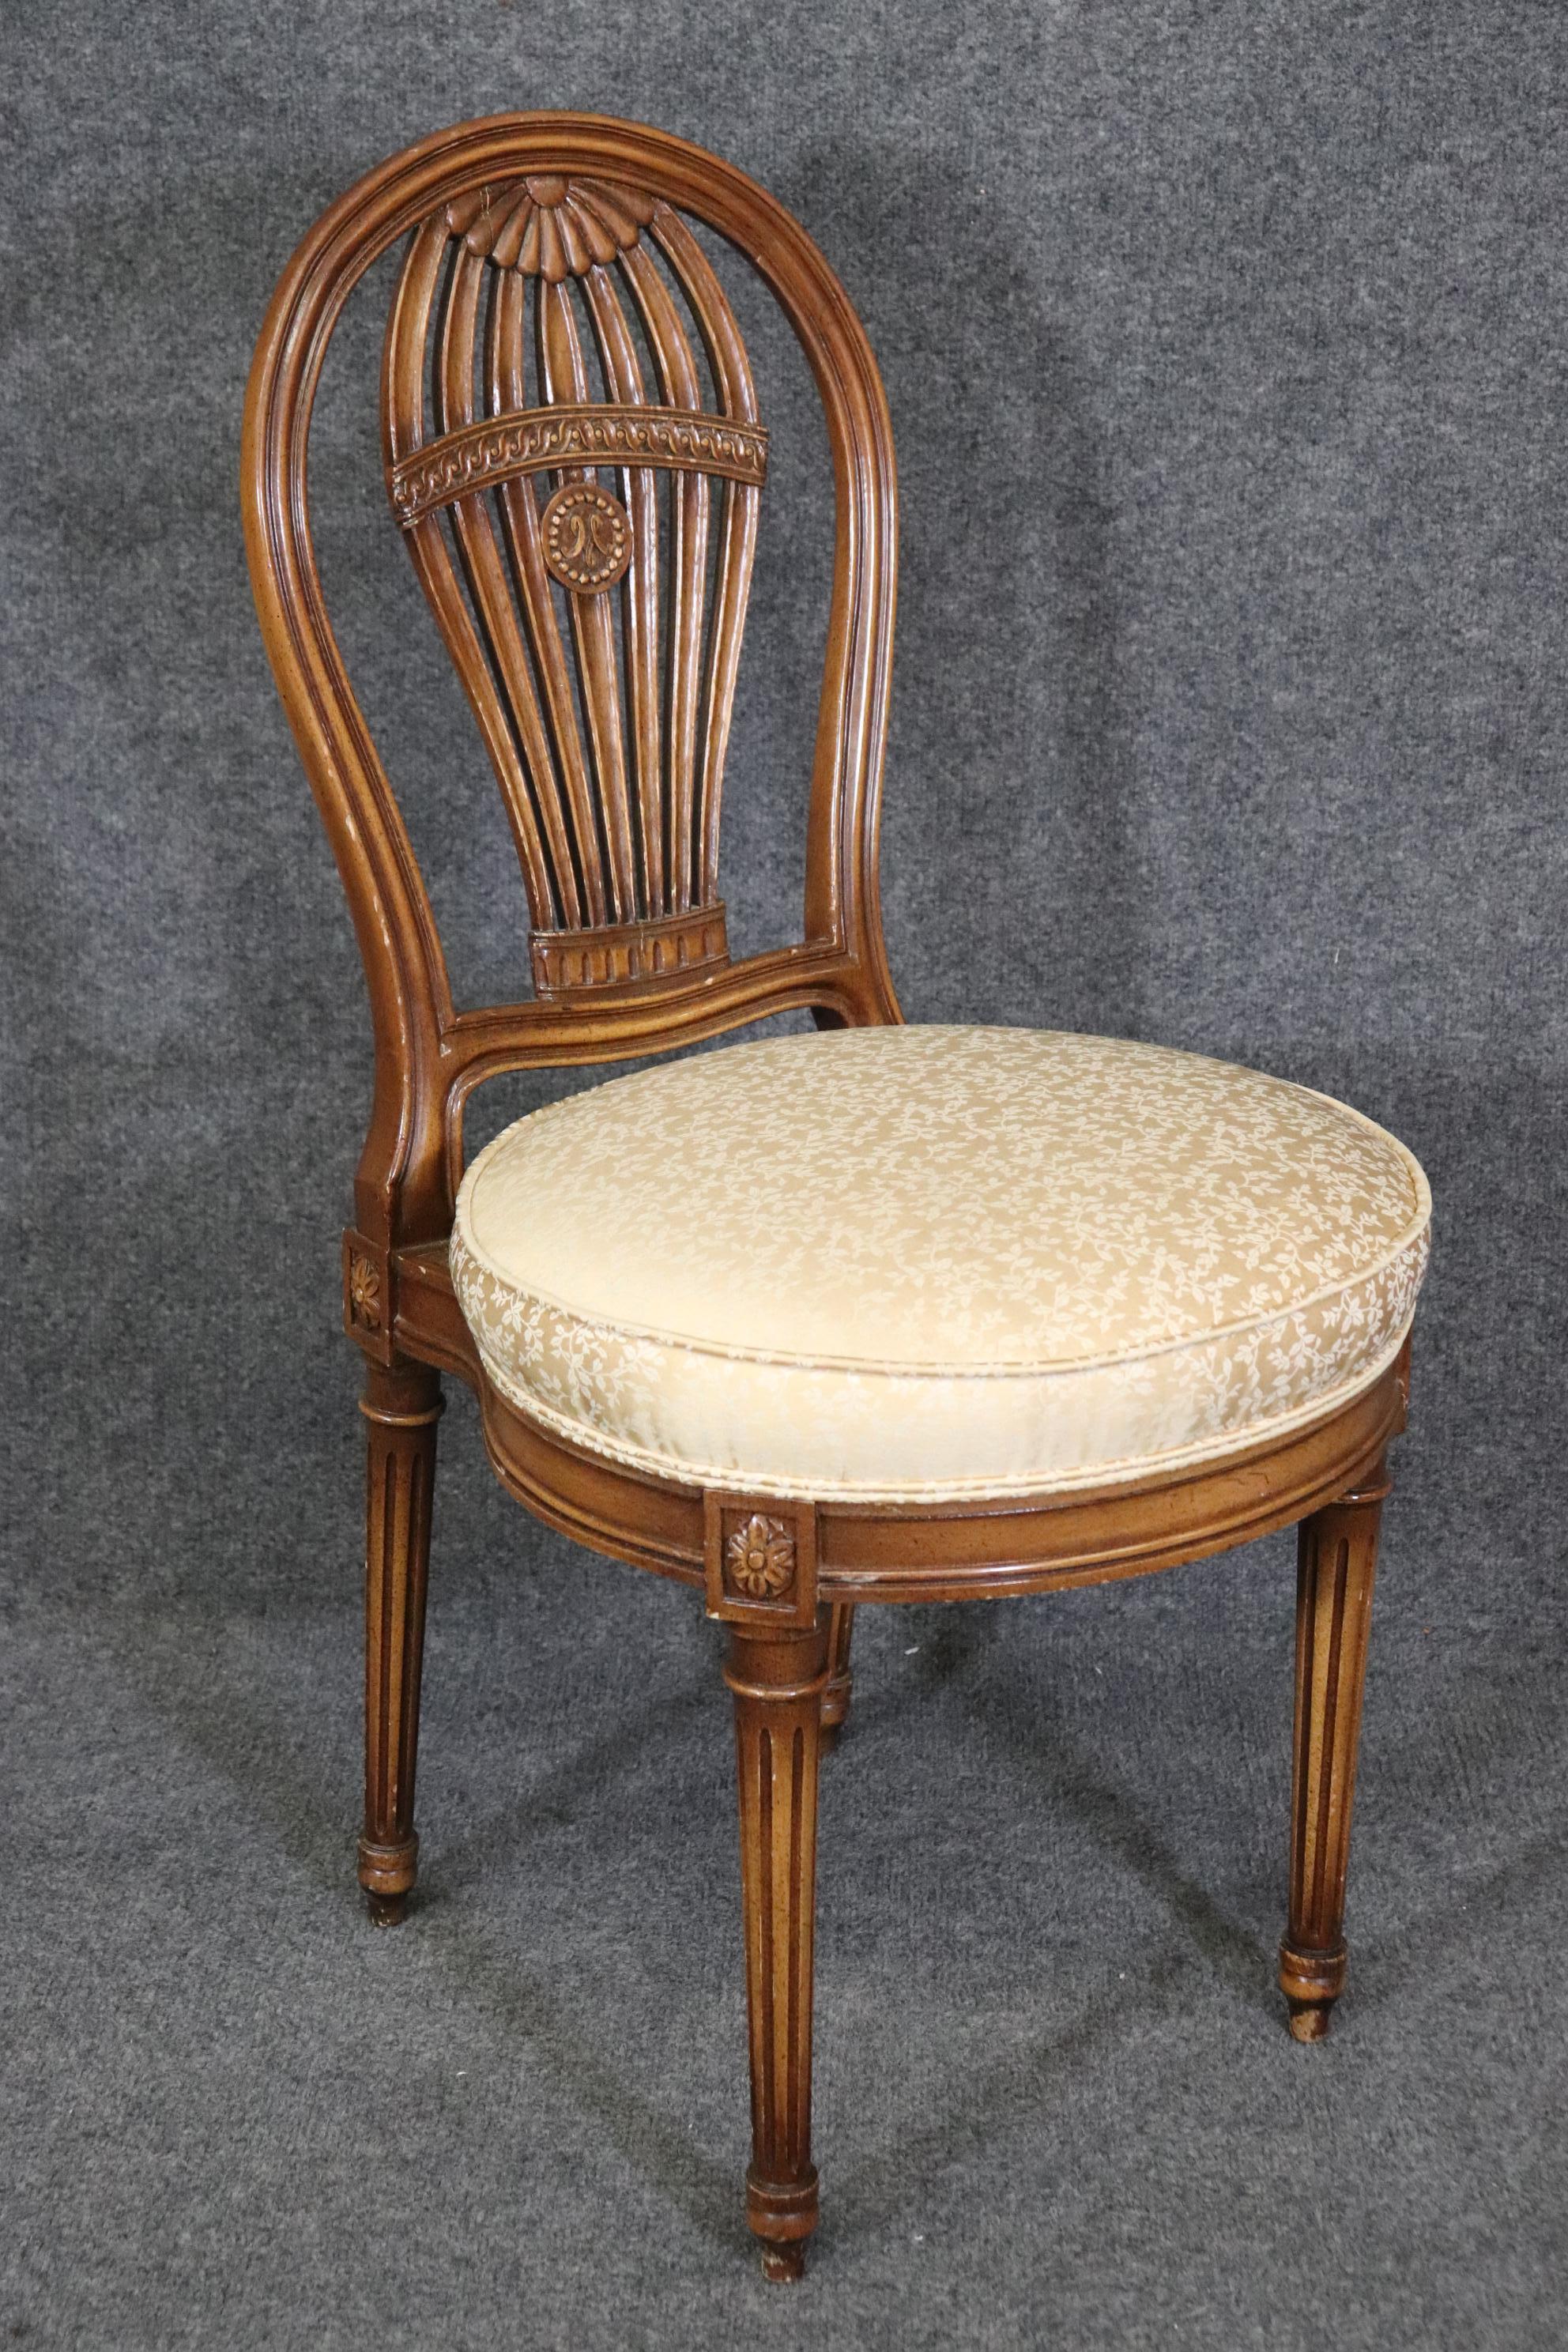 Dimensions- H: 36 1/4in W: 18 1/2in D: 21in SH: 19 1/2in 
This Set of 6 French Louis XVI Style Balloon Dining Chairs In The Manner of Maison Jansen are absolutely spectacular! These chairs are known for being one of the most famous designs done by